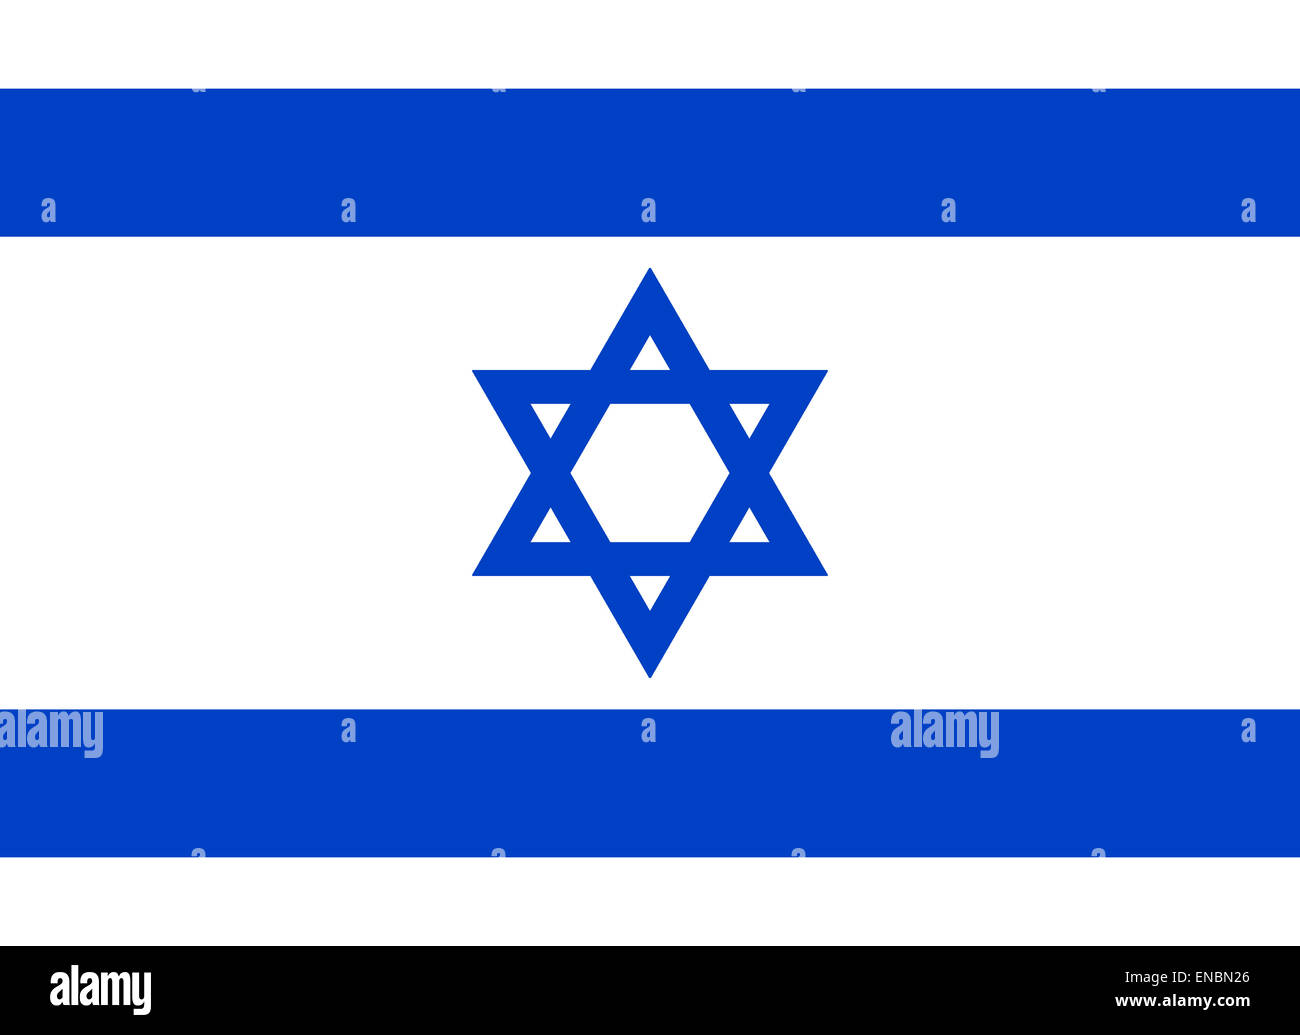 Flagge des Staates Israel. Stockfoto